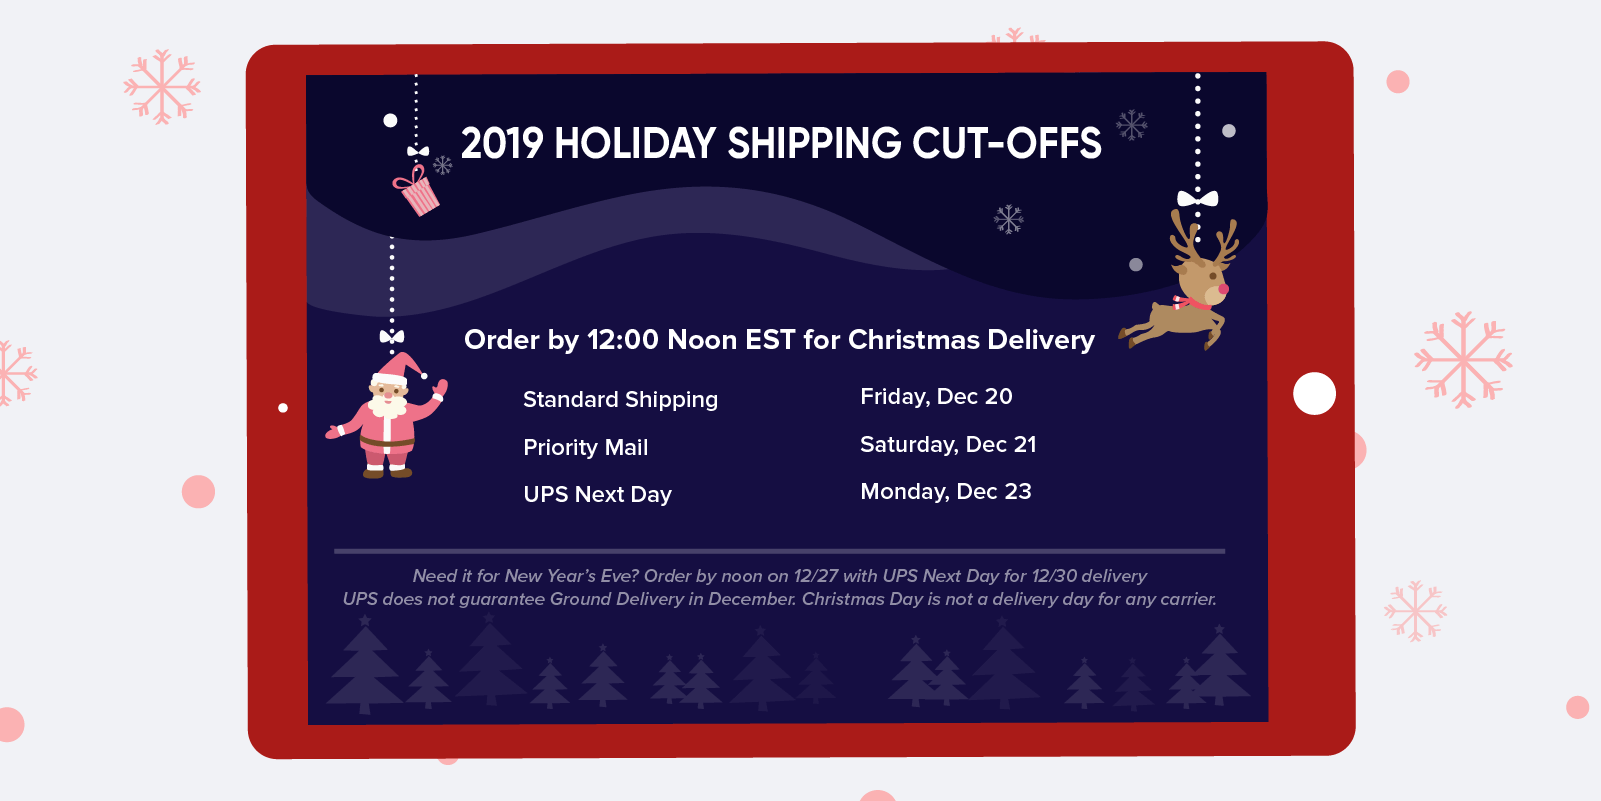 Tomorrow is the last day to order to ensure Christmas Delivery